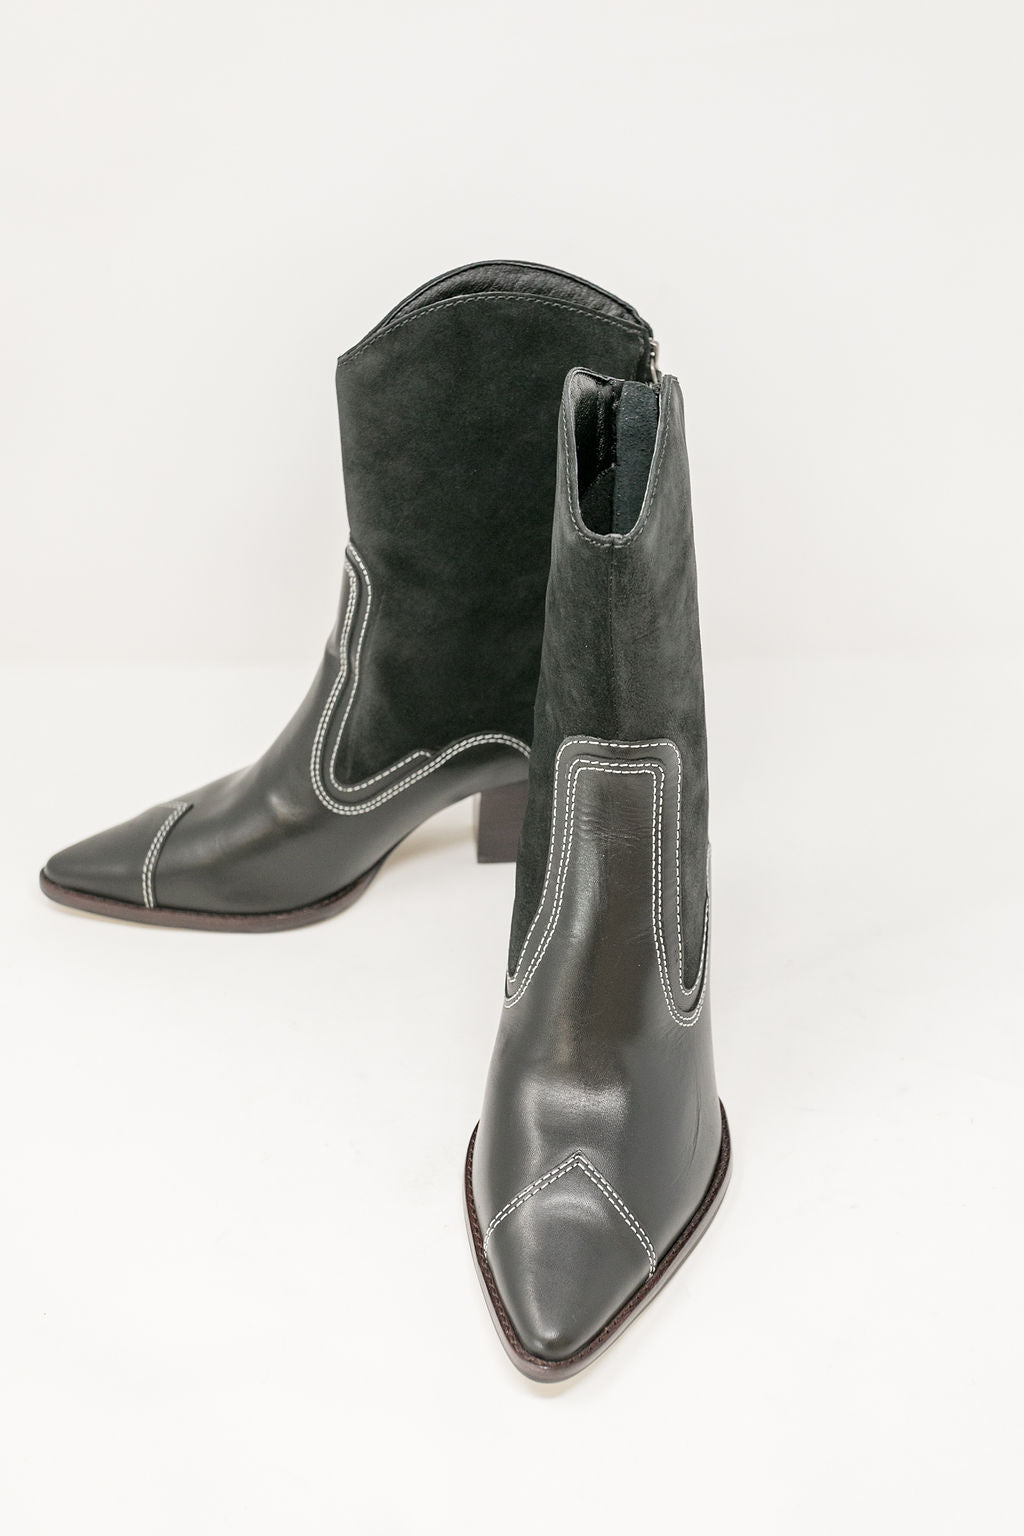 Matisse | Carina Western Boot | Black Suede & Leather - Poppy and Stella